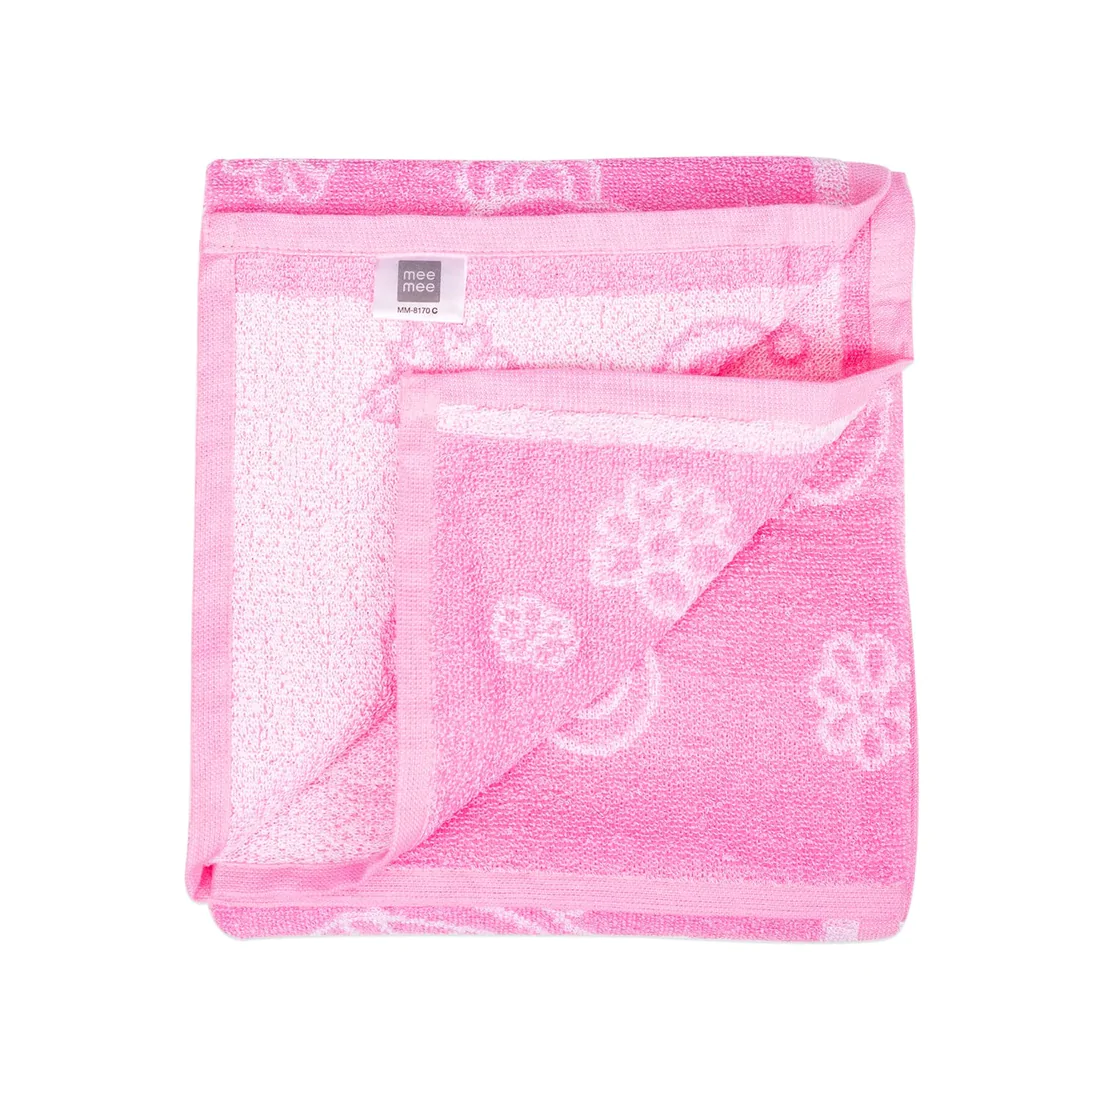 Mee Mee Soft Absorbent Bamboo Cotton Baby Towel | Reversible Baby Towel  with Quick Absorb